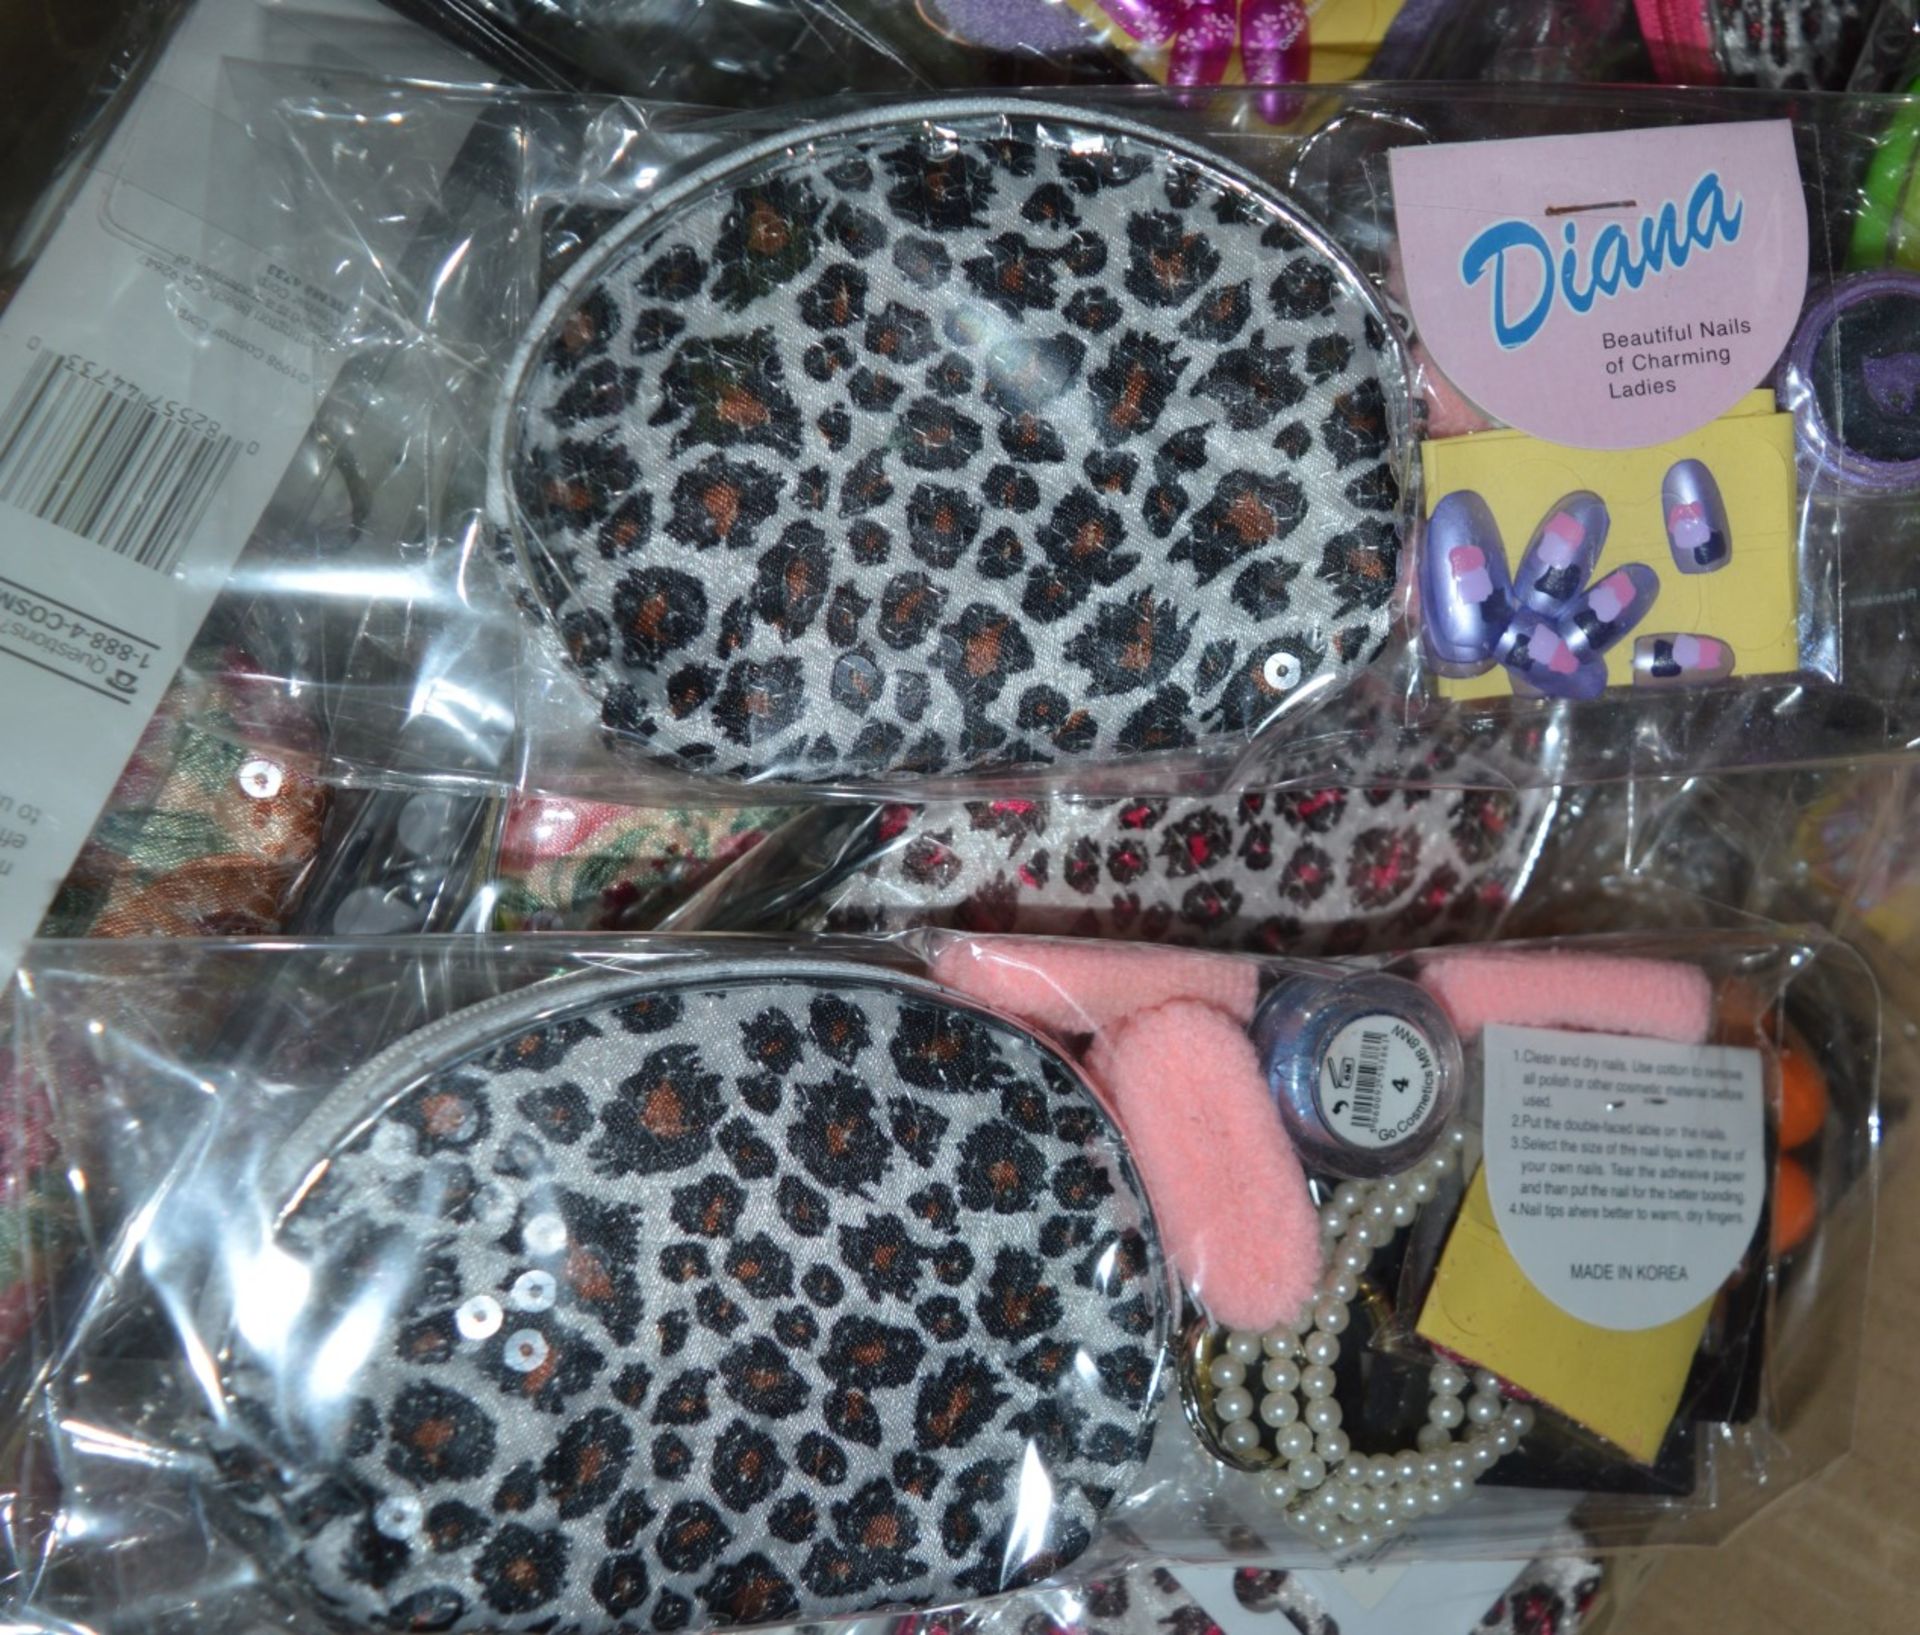 50 x Girls Beauty Gift Sets - Each Set Includes Items Such as a Stylish Purse, Ear Rings, Hair - Image 12 of 13